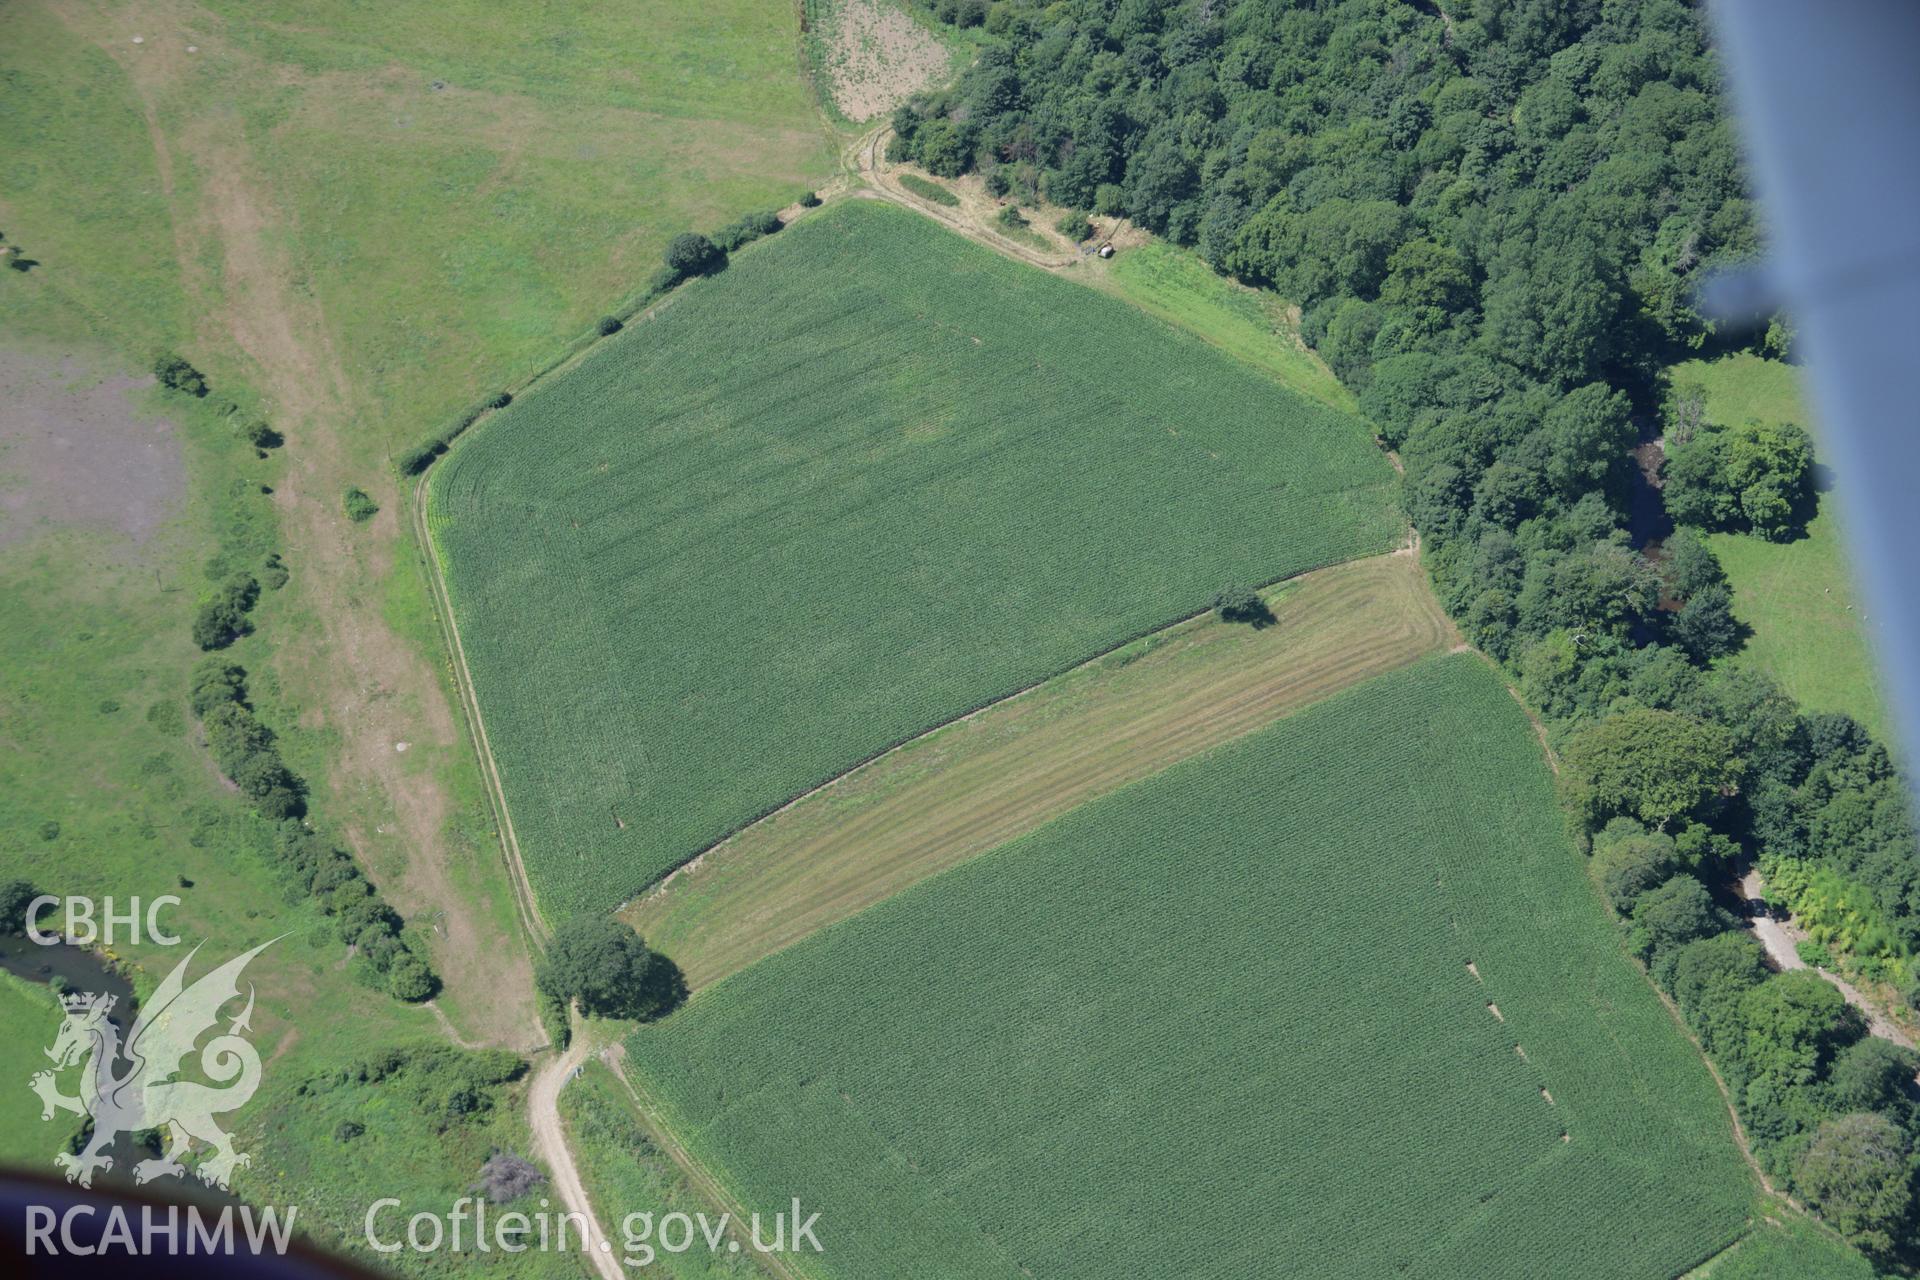 RCAHMW colour oblique aerial photograph of Vervil Dyke and possible enclosure. Taken on 24 July 2006 by Toby Driver.